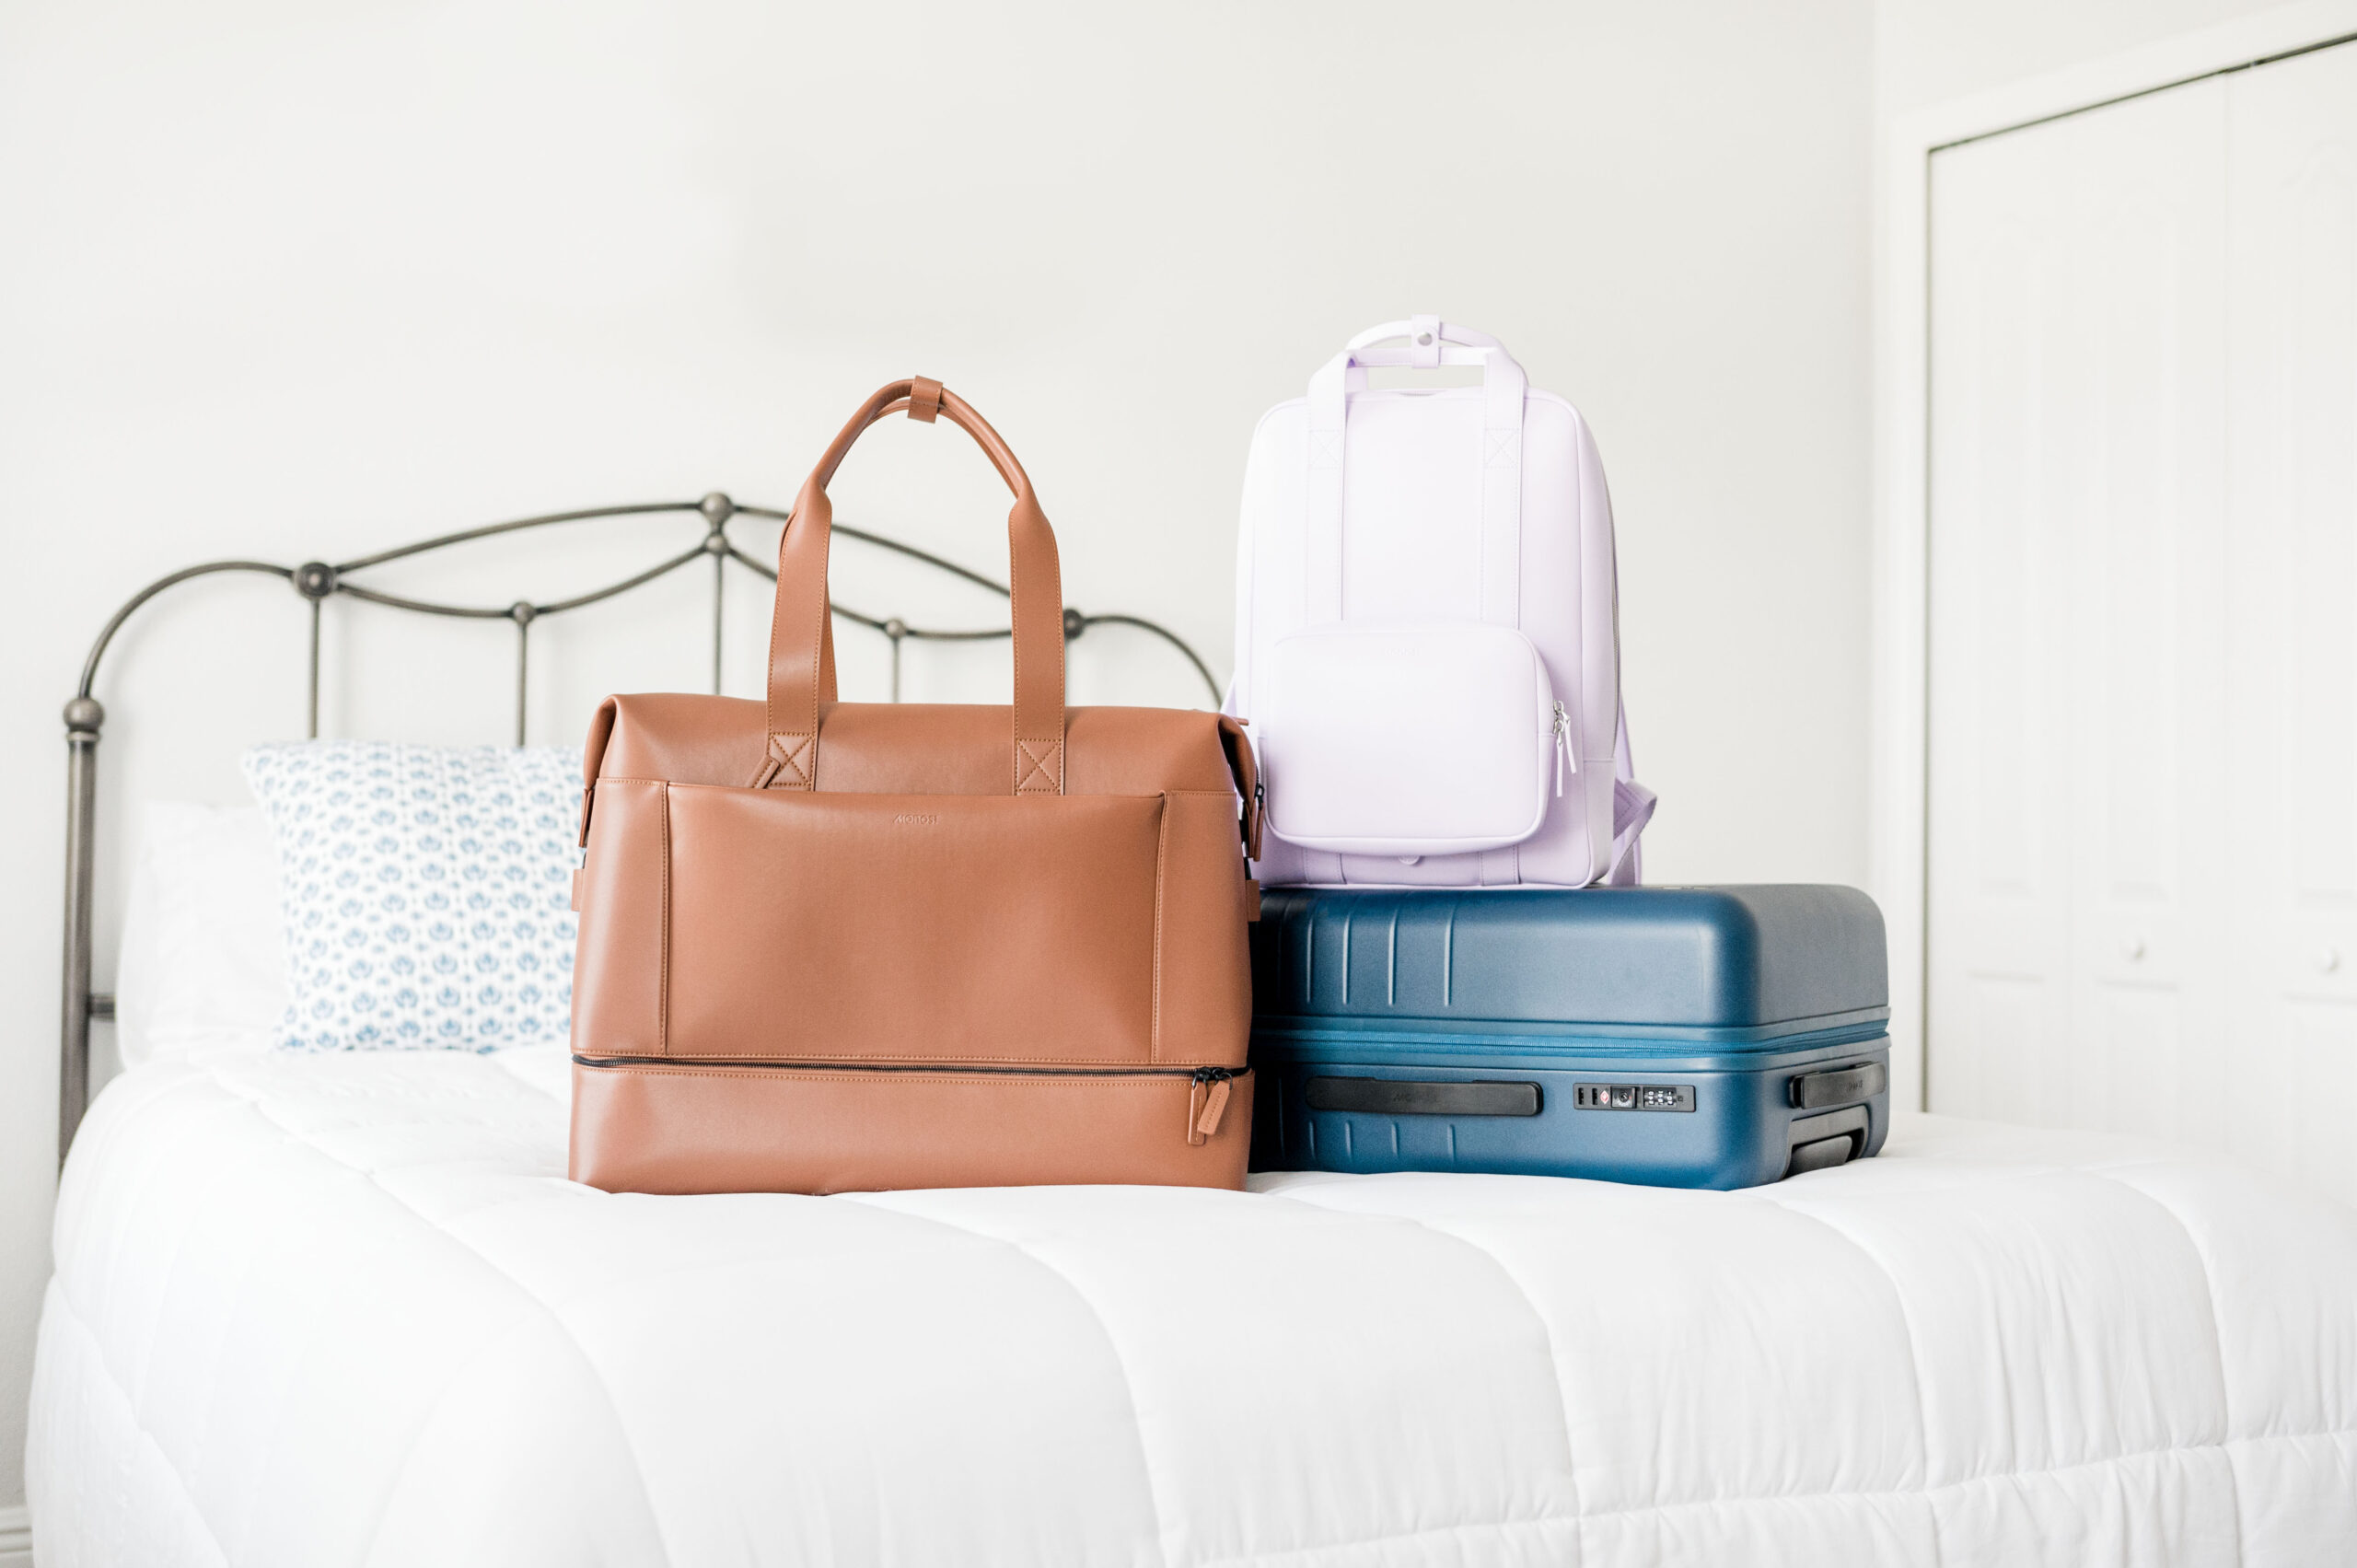 Monos luggage on bed featuring the mahogany weekender bag, backpack, and carry-on suitcase, ultimate packing list